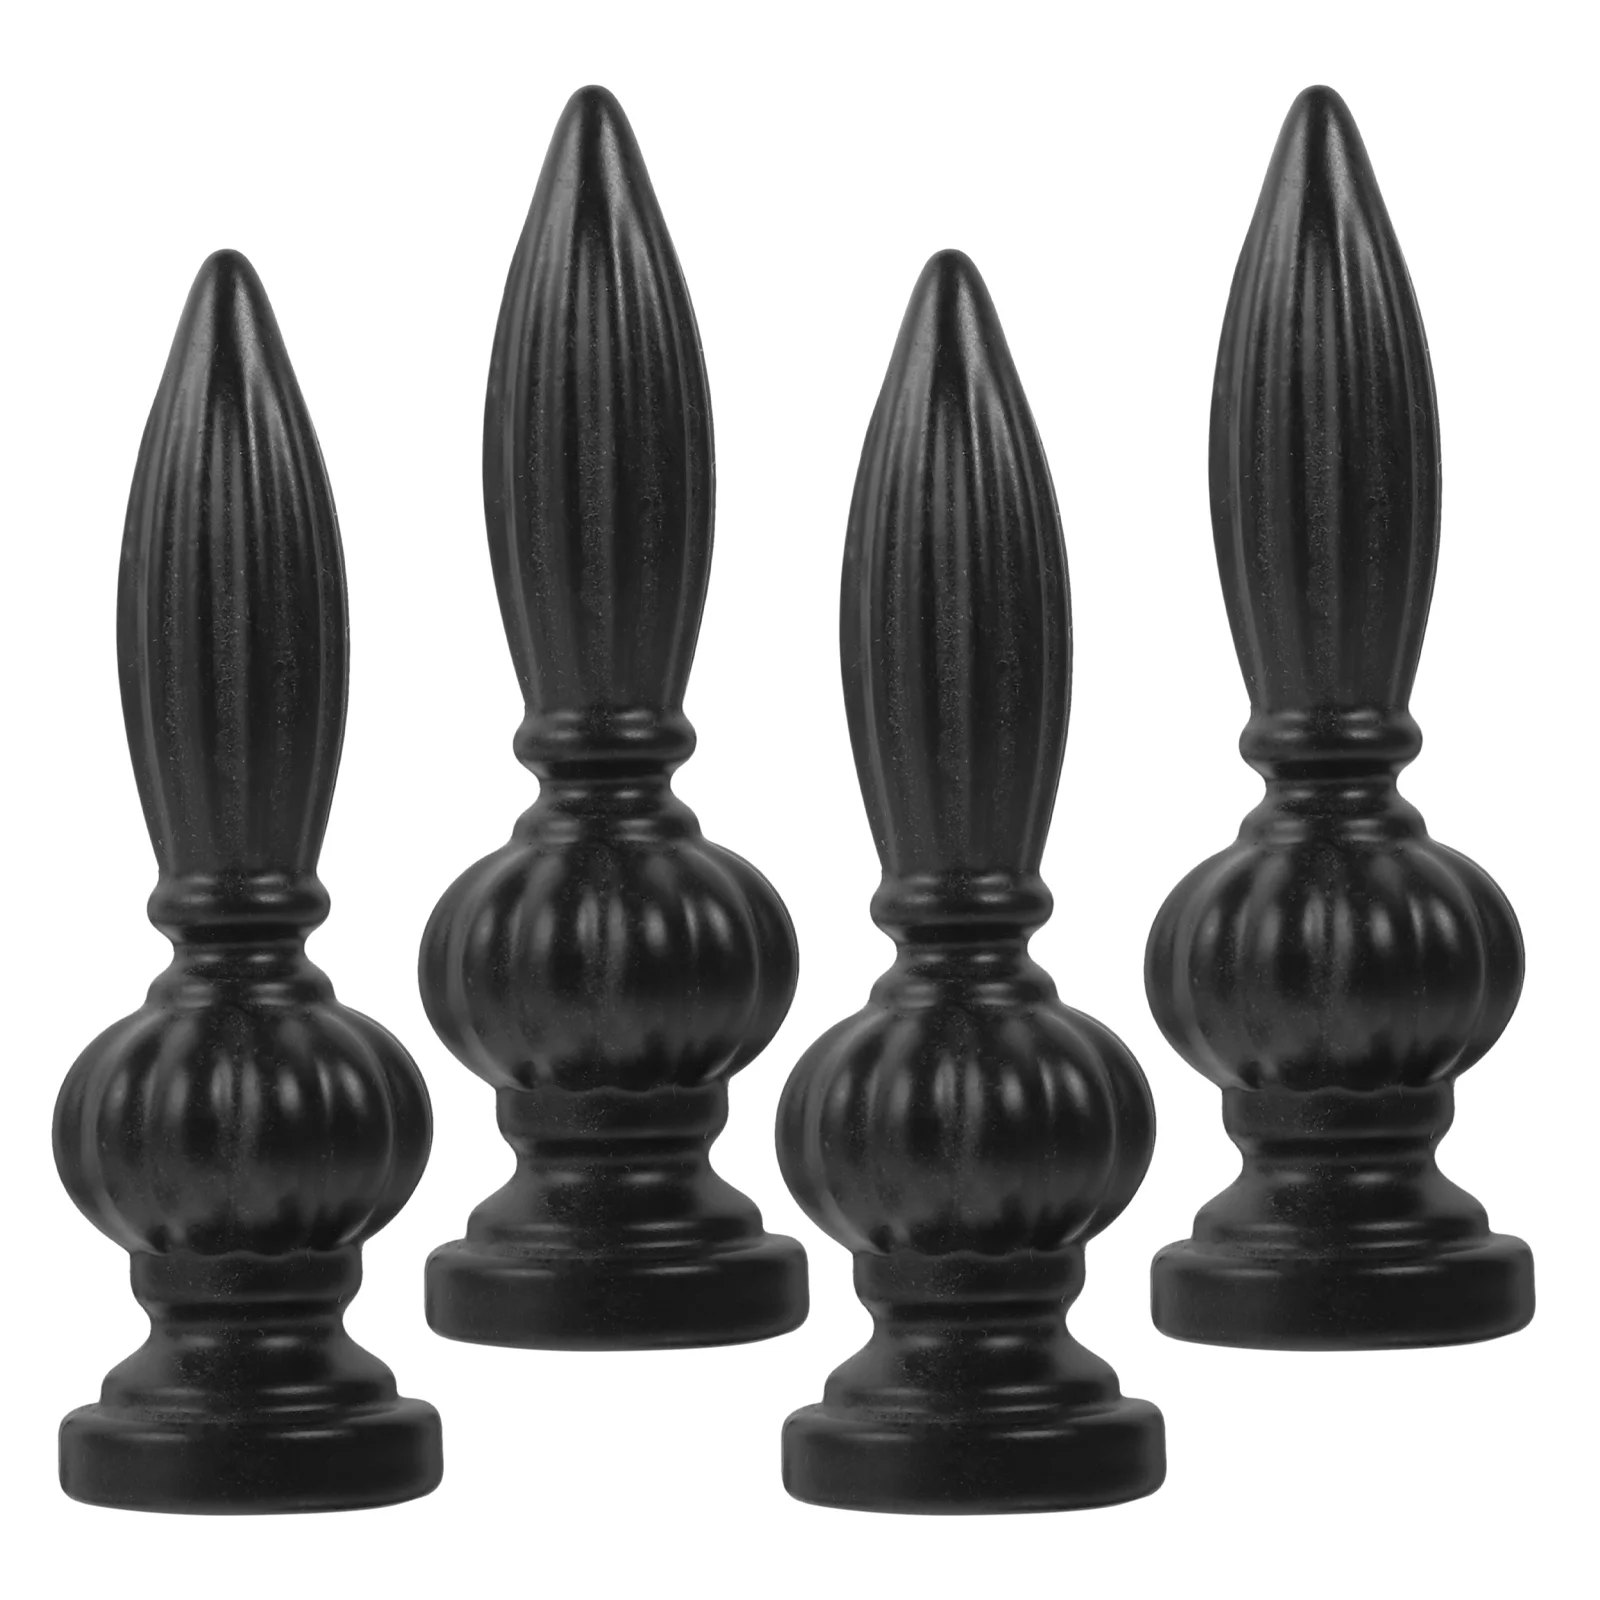 

4 Pcs Lamp Cap Decoration Finial Topper Ceiling Decorations Lampshade Holder Lighting